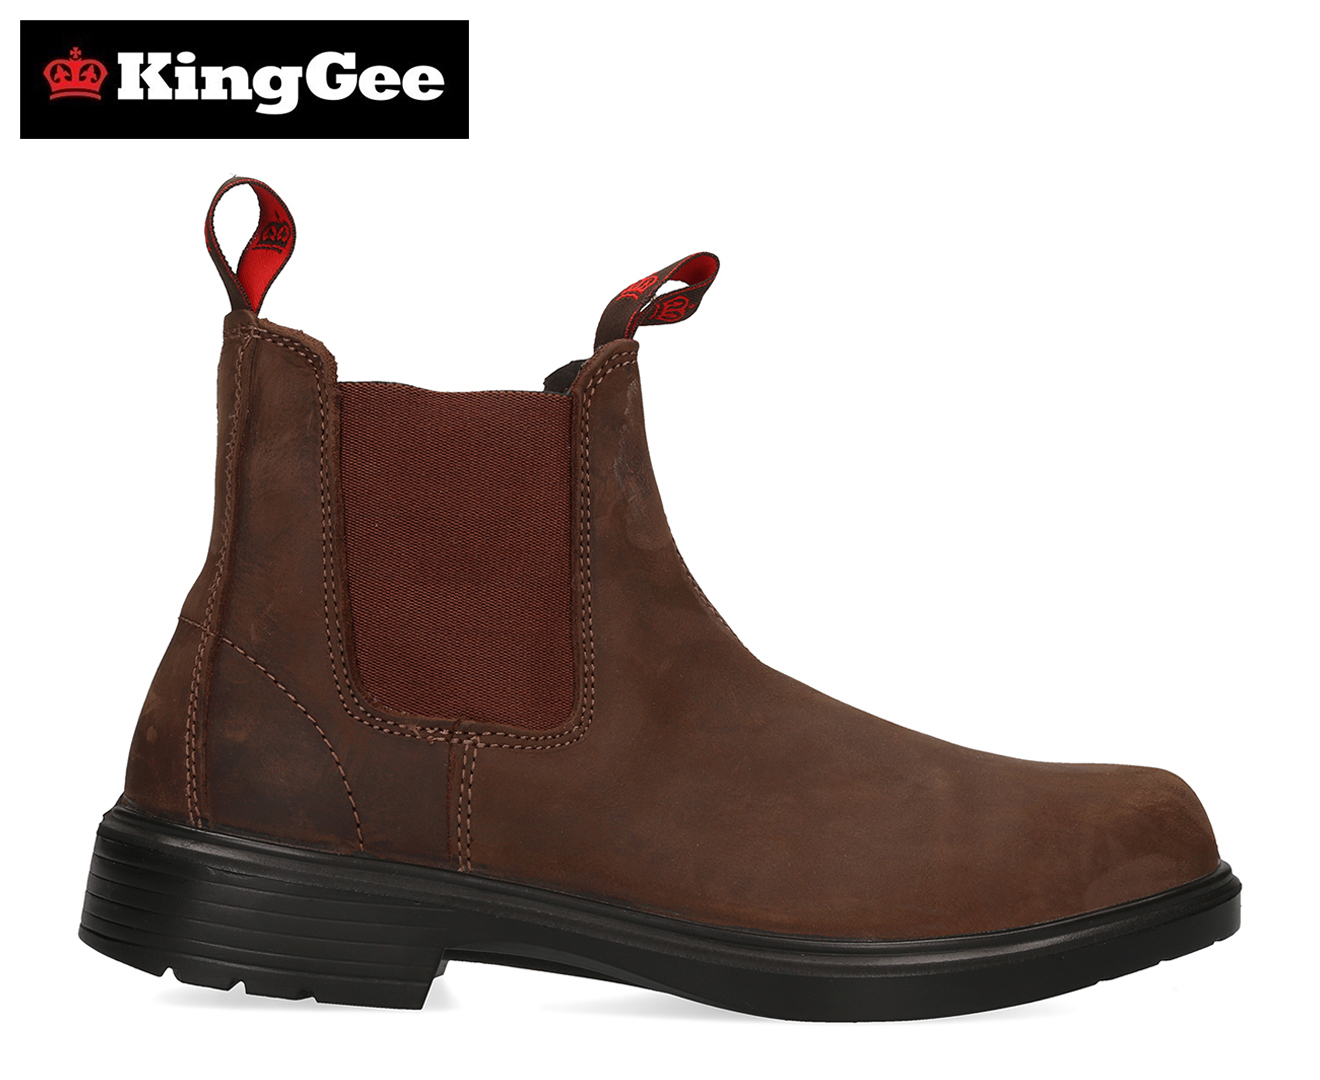 king gee boots kmart